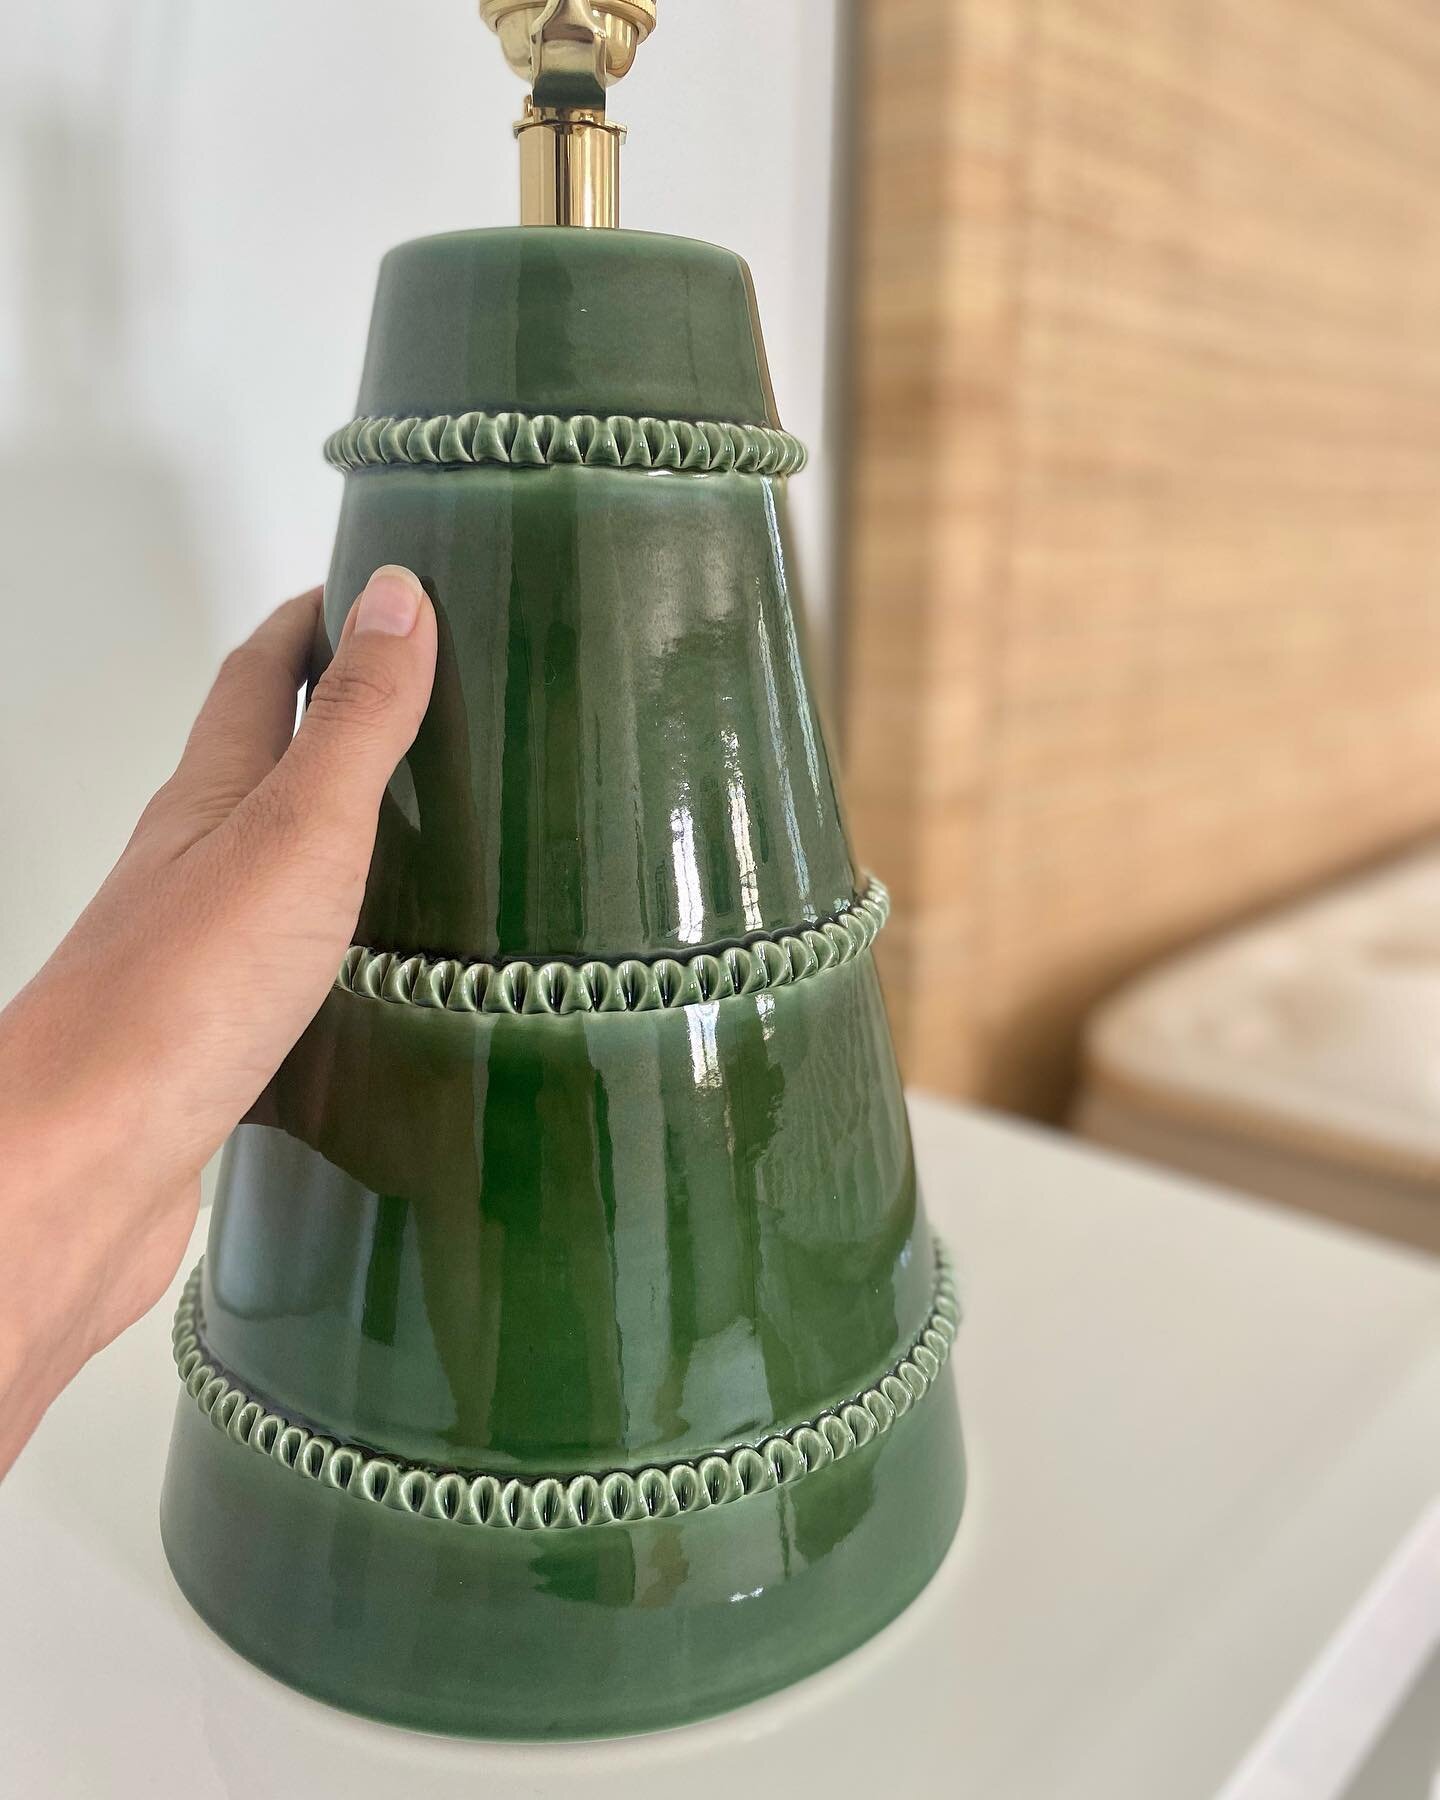 This is me contemplating running away with these beauties from today&rsquo;s master bedroom install. Just kidding, but seriously no one does more beautiful lamps than @shophwangbishop

The thyme color way is the perfect shade of green + a little ratt